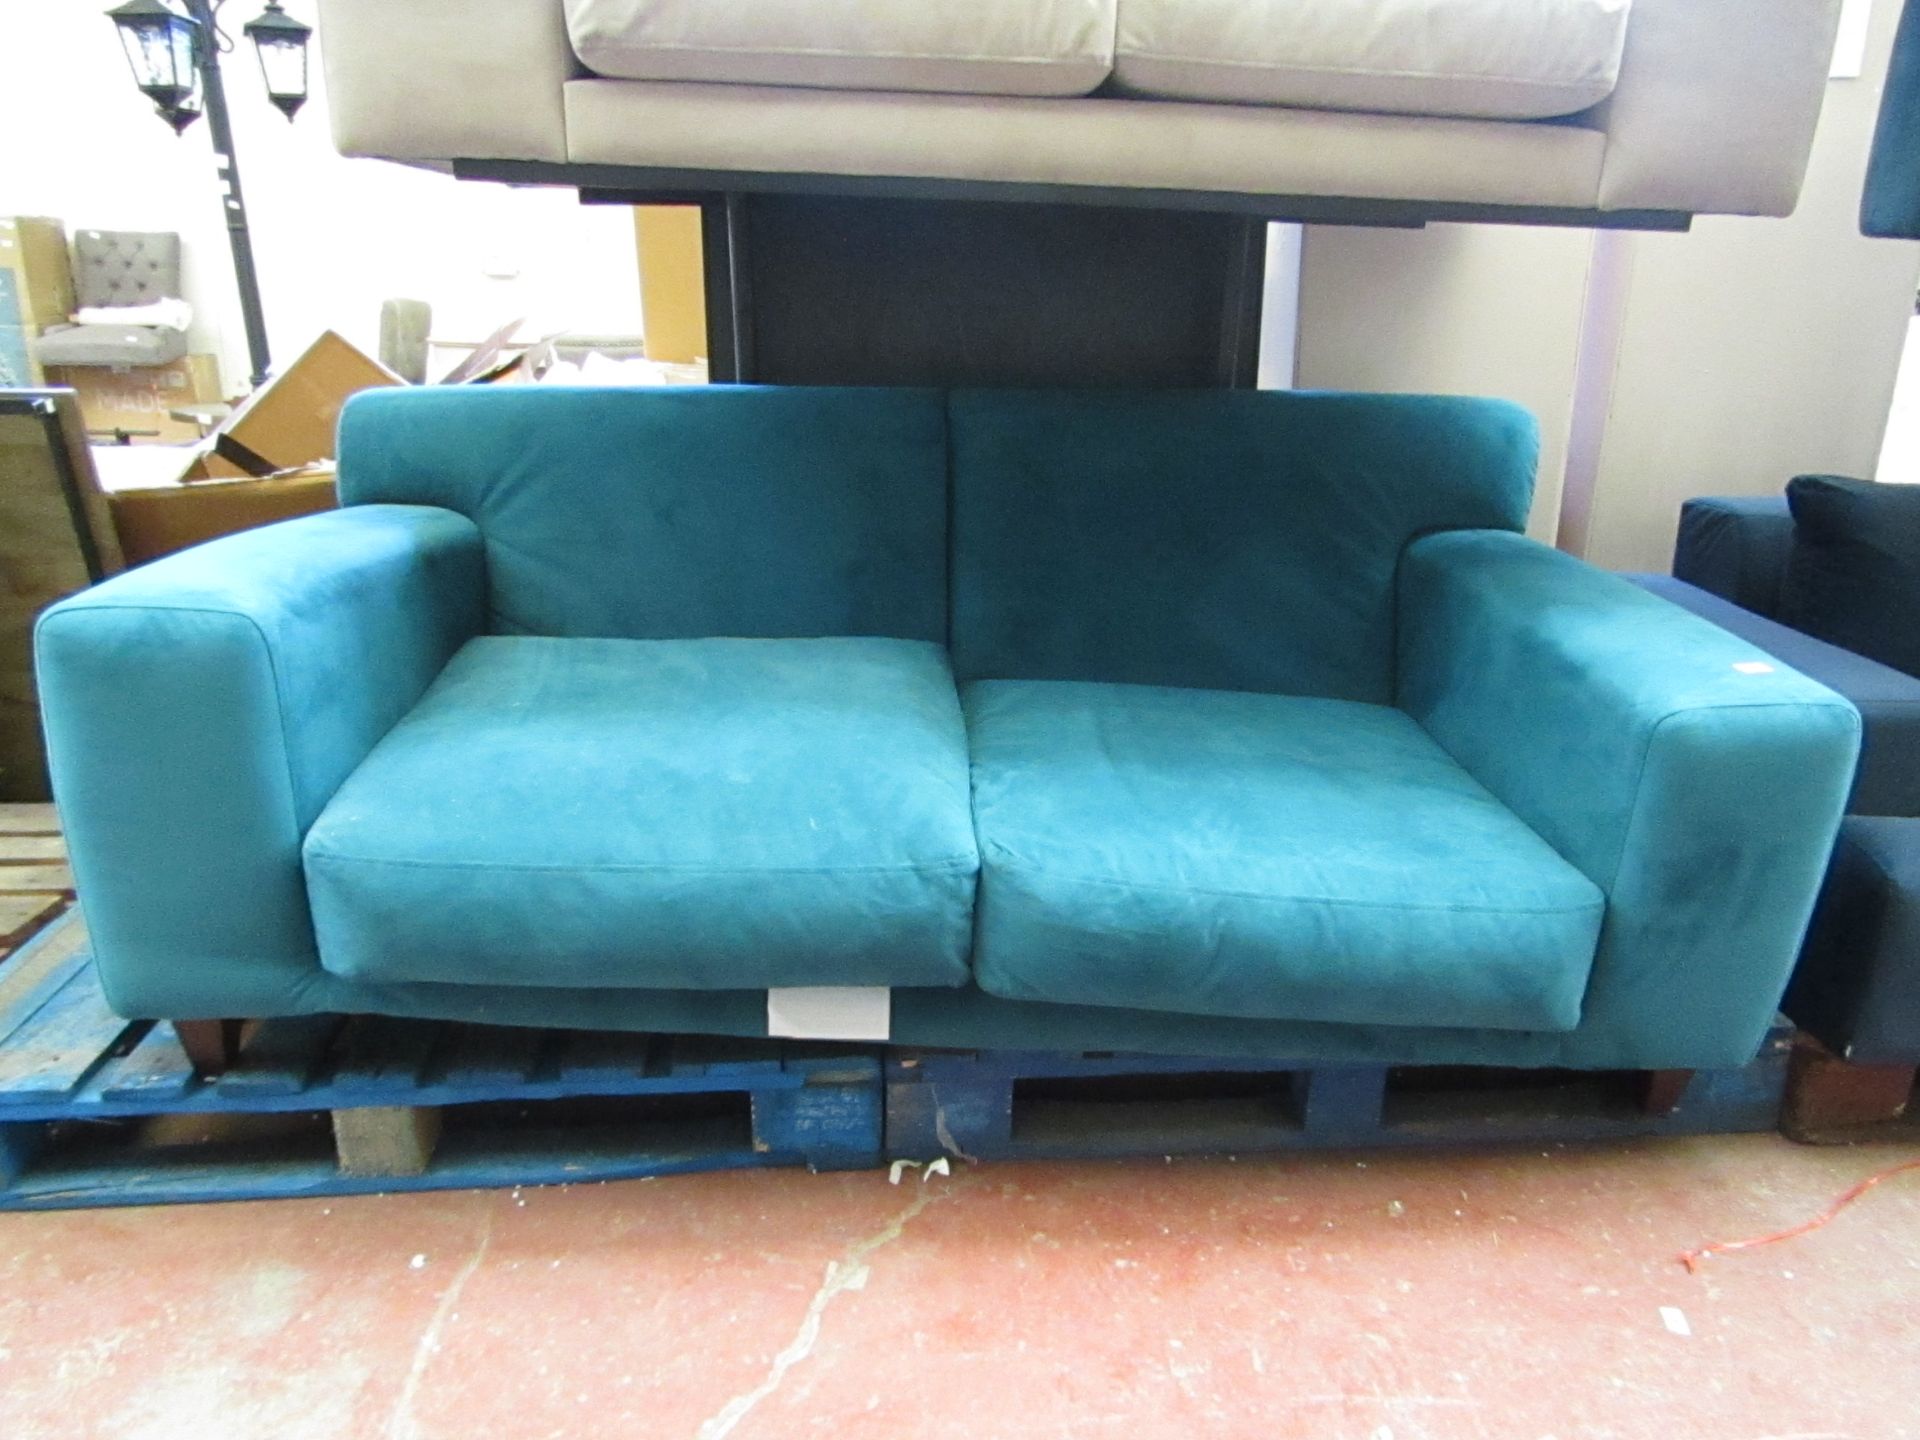 | 1X | MADE.COM 2 SEATER SOFA | TEAL BLUE | GOOD CONDITION BUT NO FEET | RRP £- |